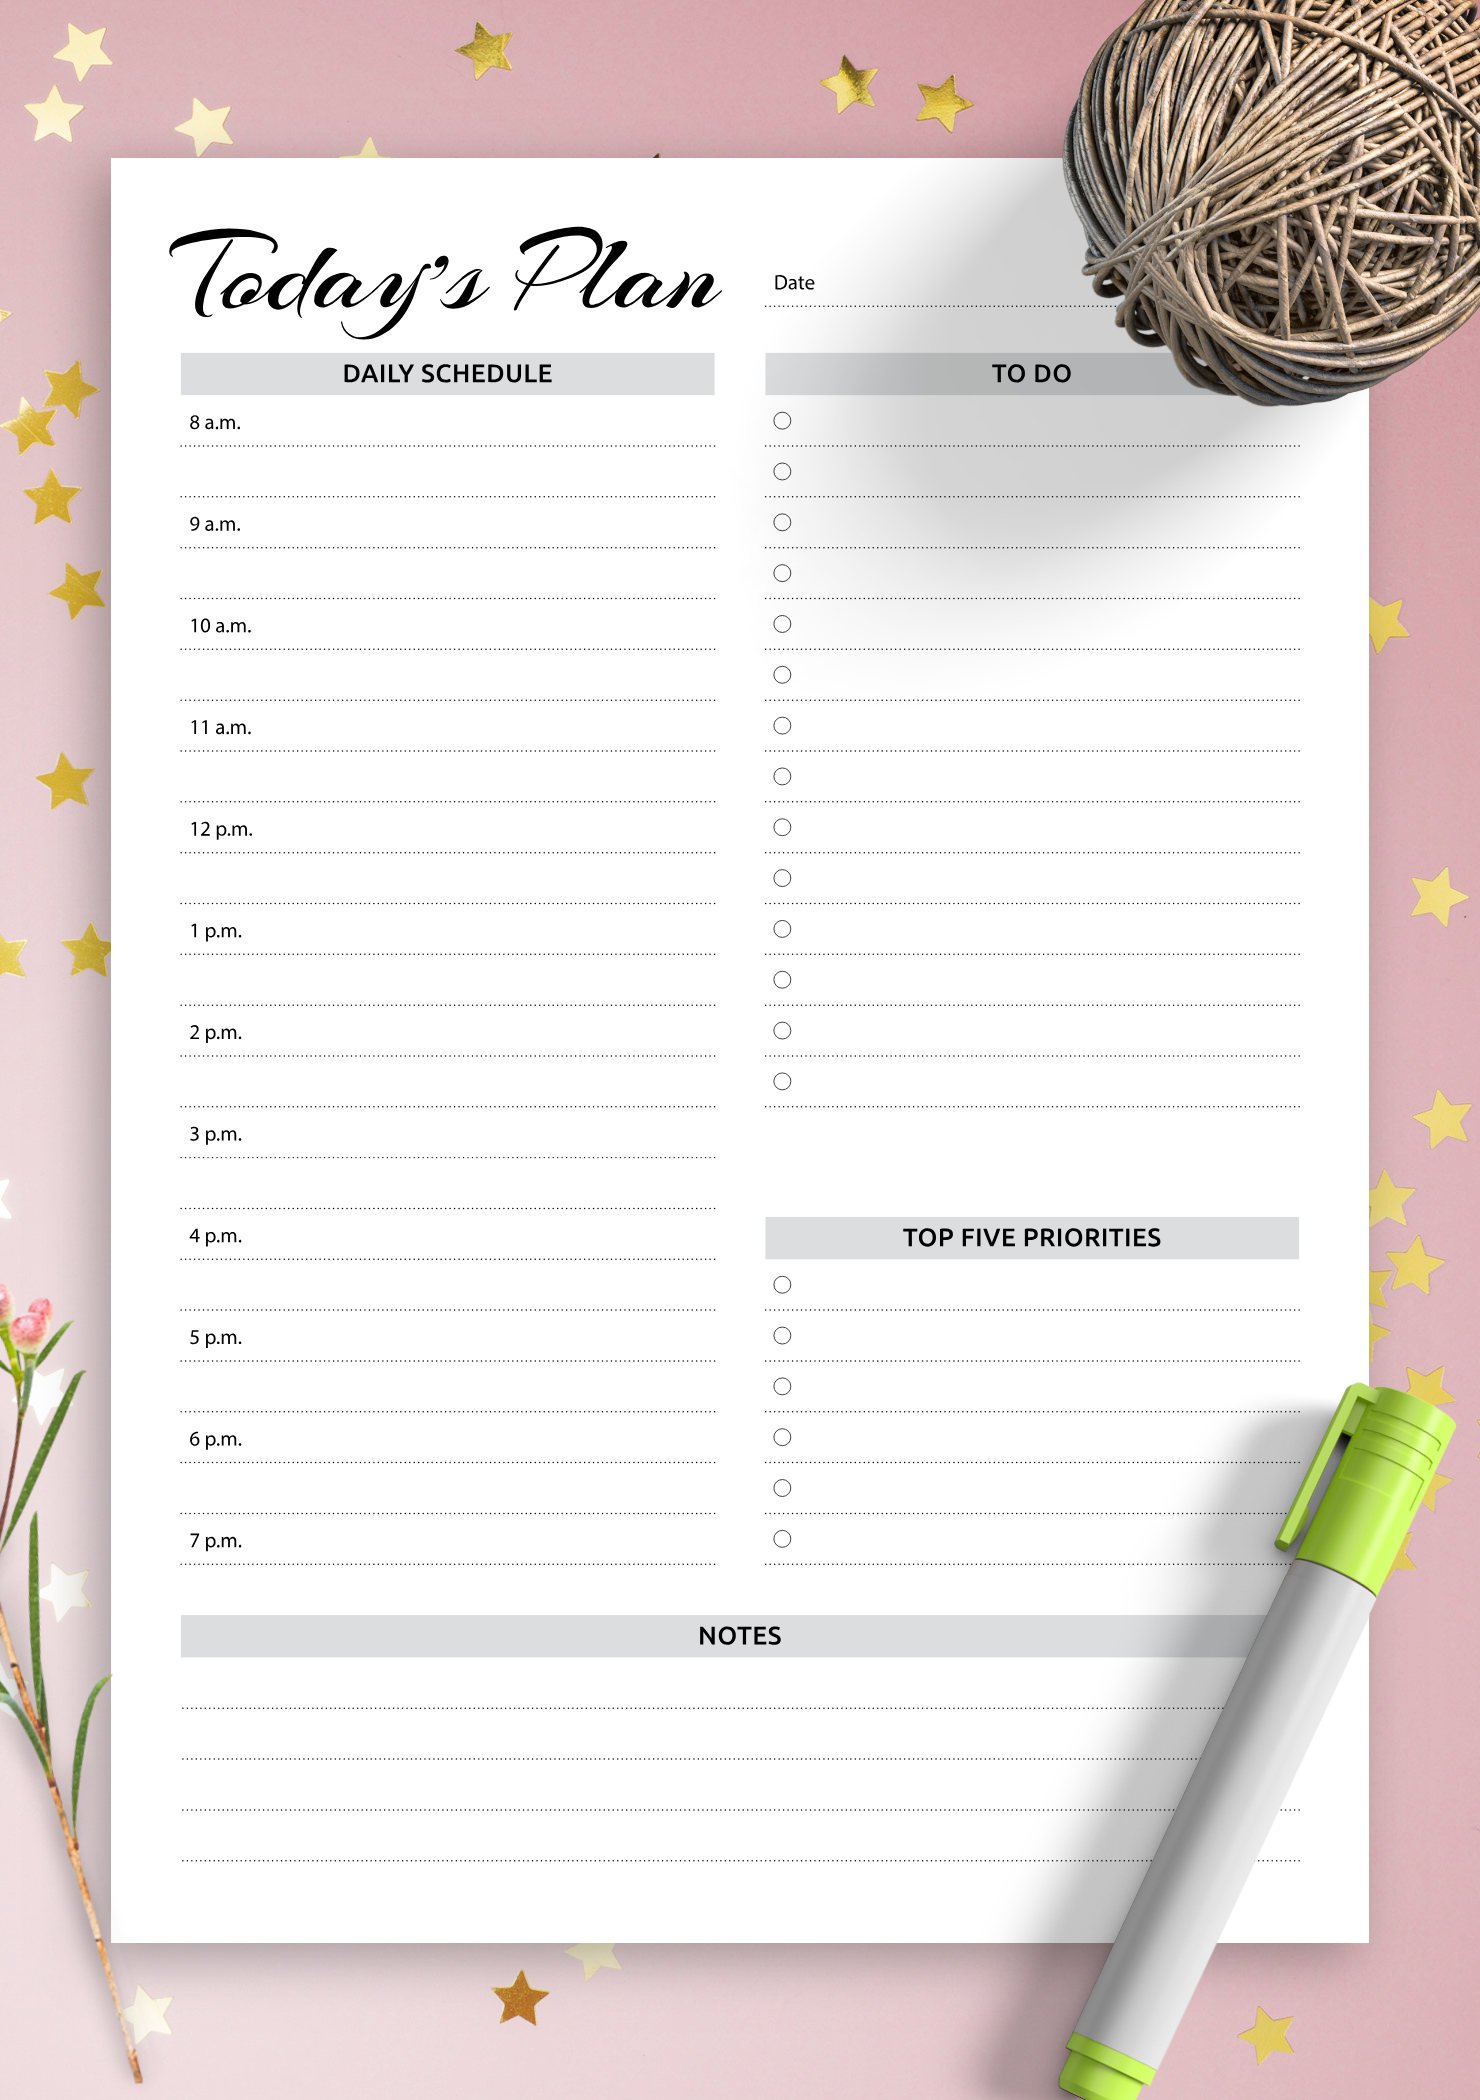 Daily Hourly Schedule Print Out :-Free Calendar Template